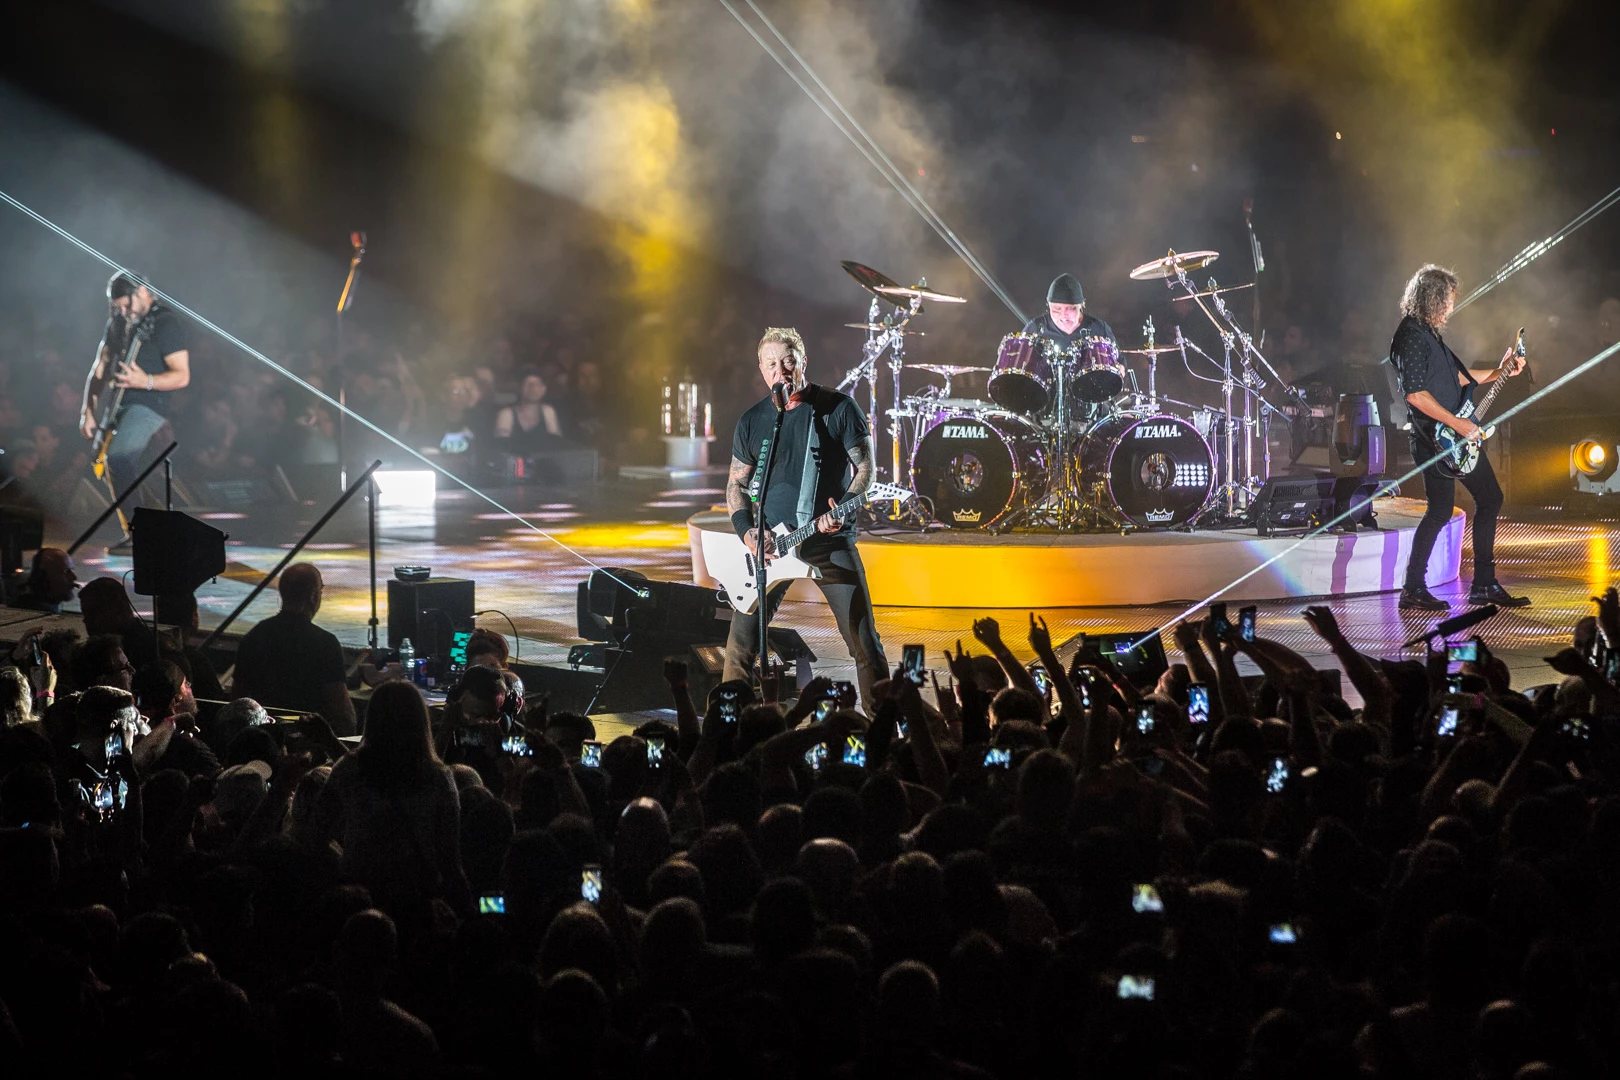 Man Arrested After Allegedly Urinating on a Family at Metallica Concert